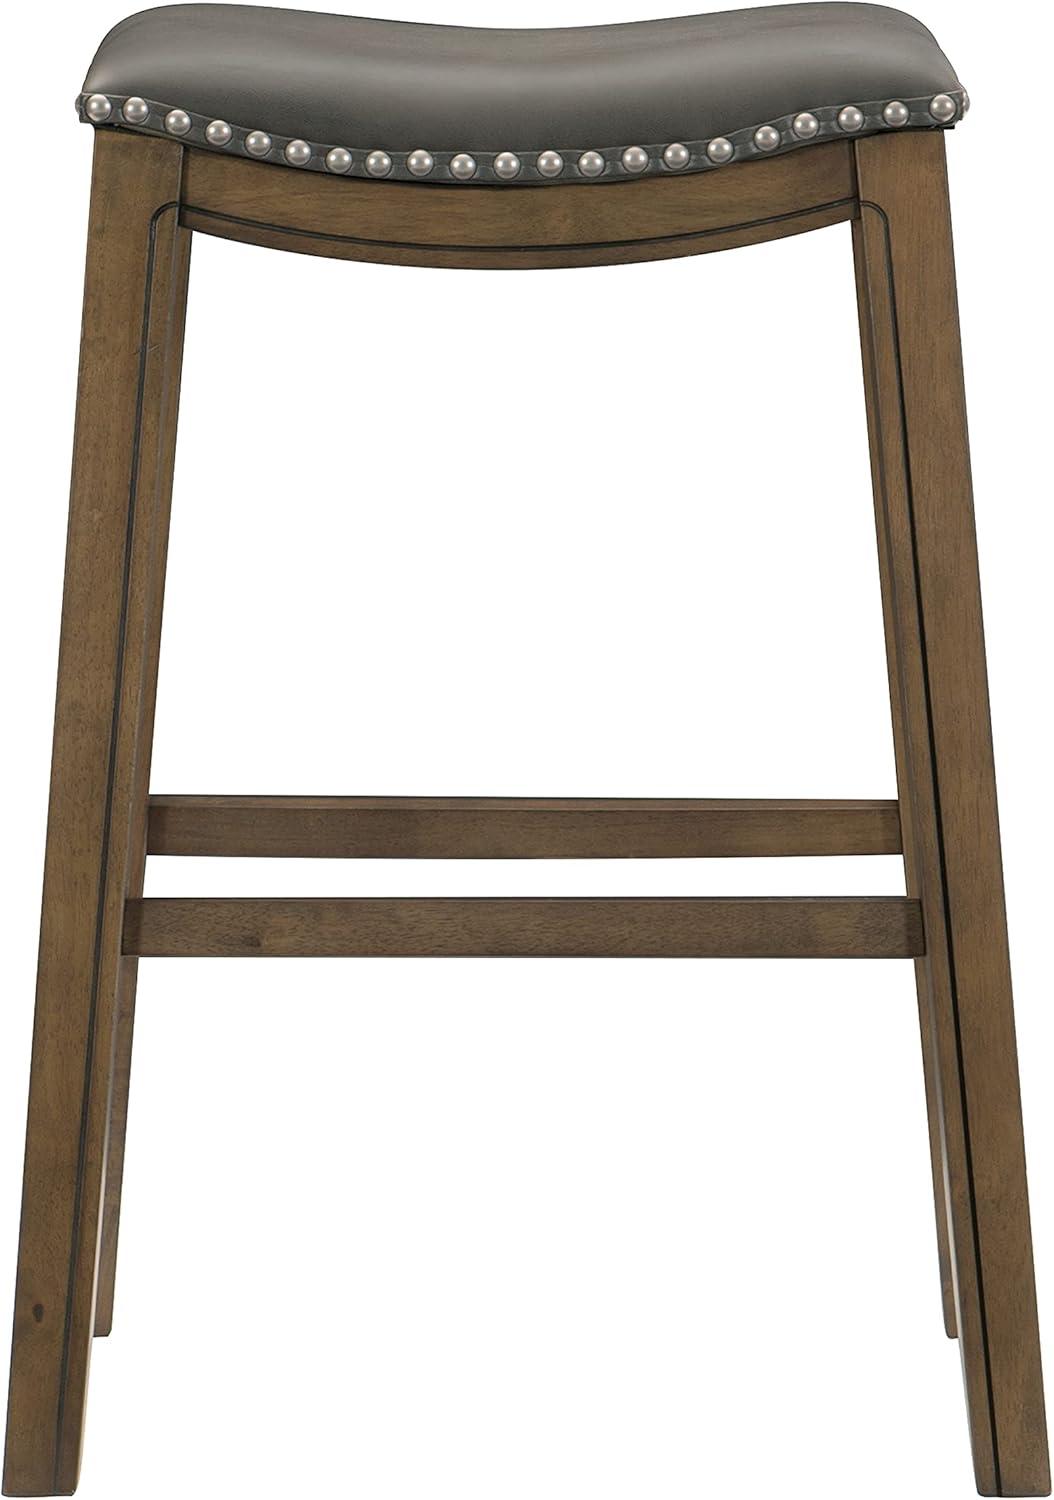 Contemporary Gray Wood Saddle Style Pub Stool, 31" Height